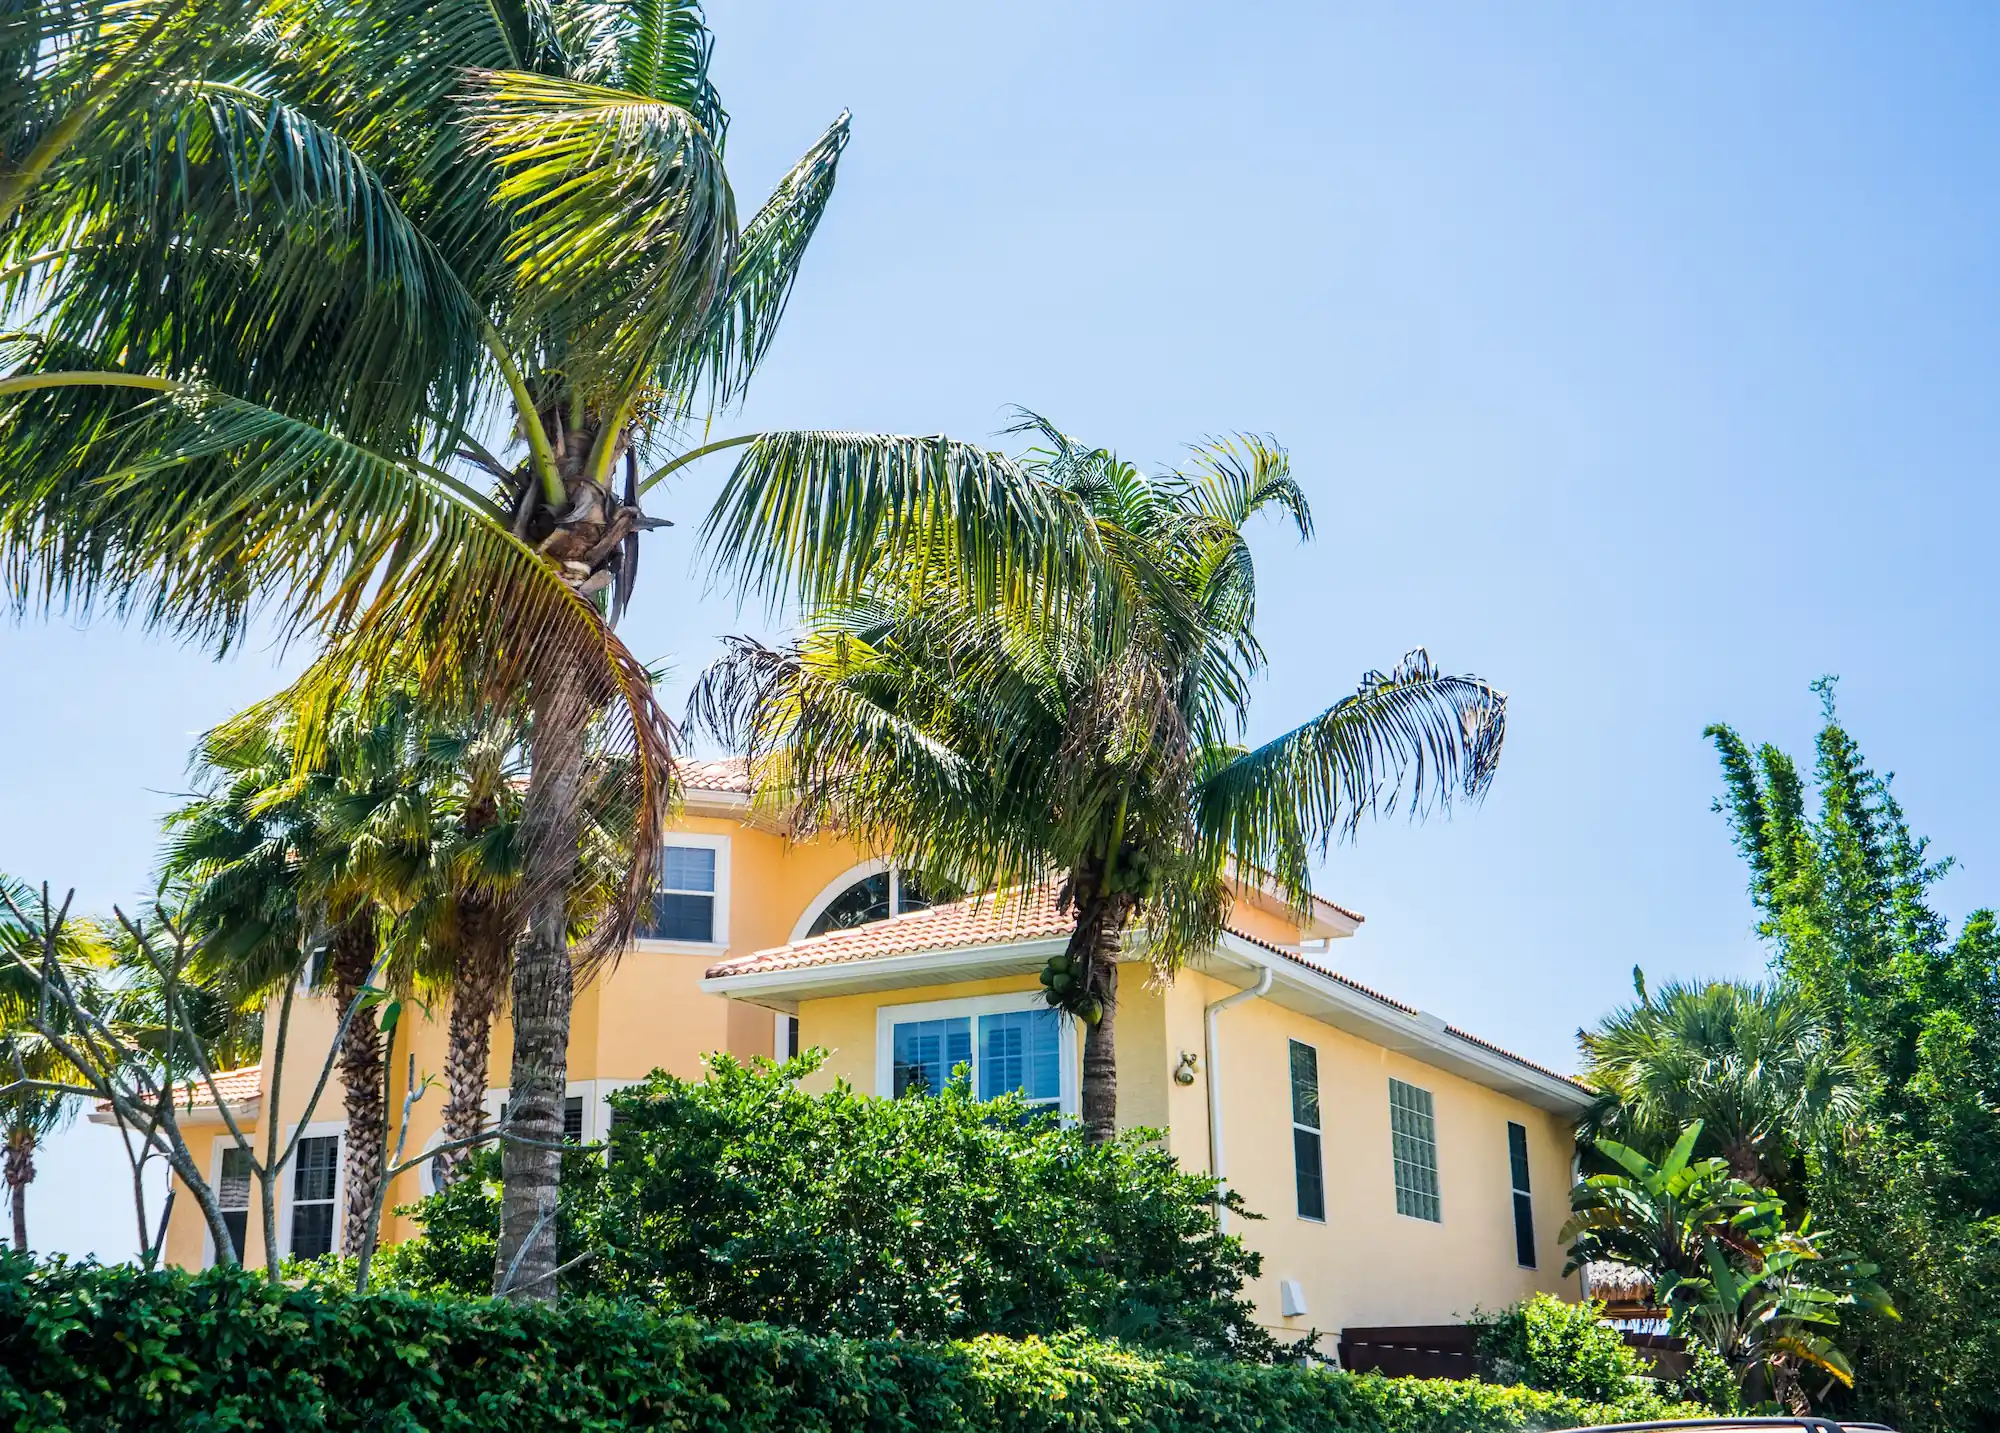 Florida home with Palm Trees